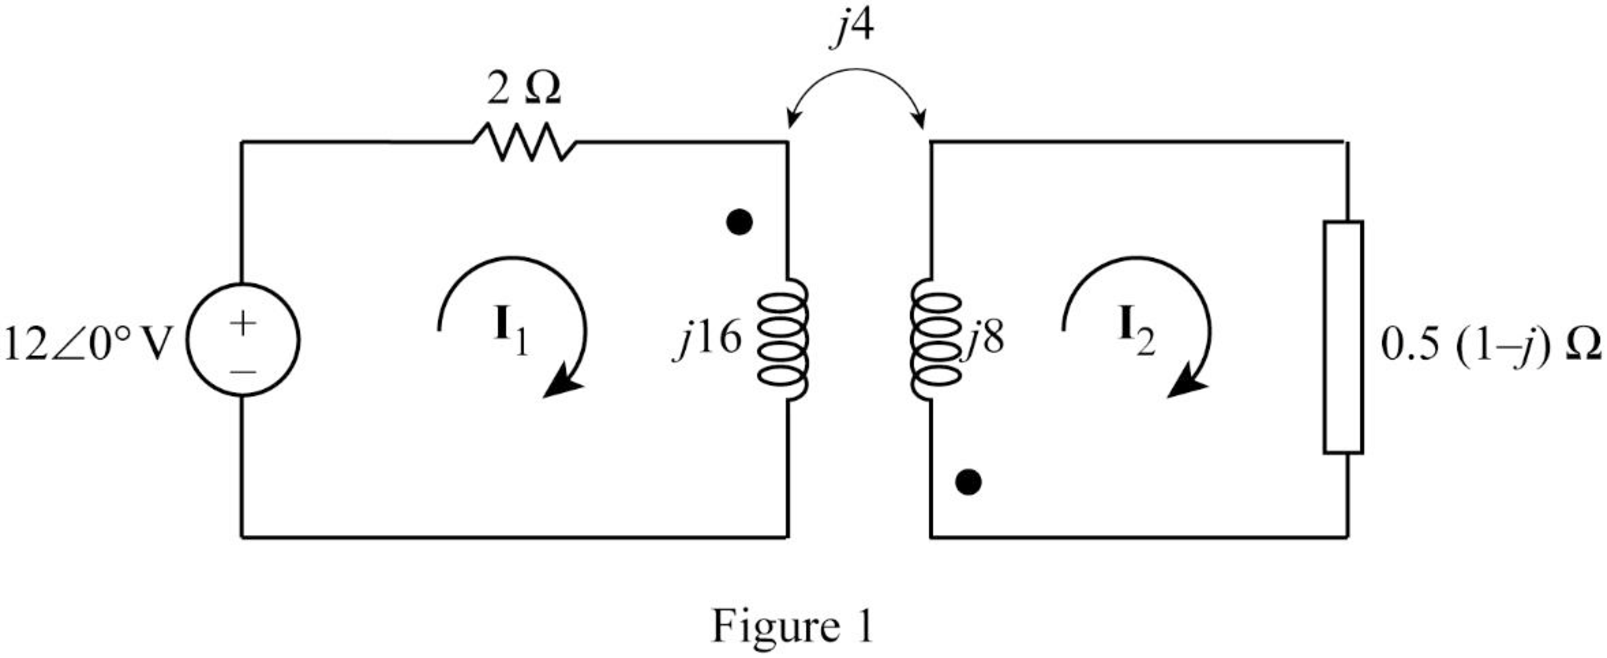 Fundamentals of Electric Circuits, Chapter 13, Problem 24P 